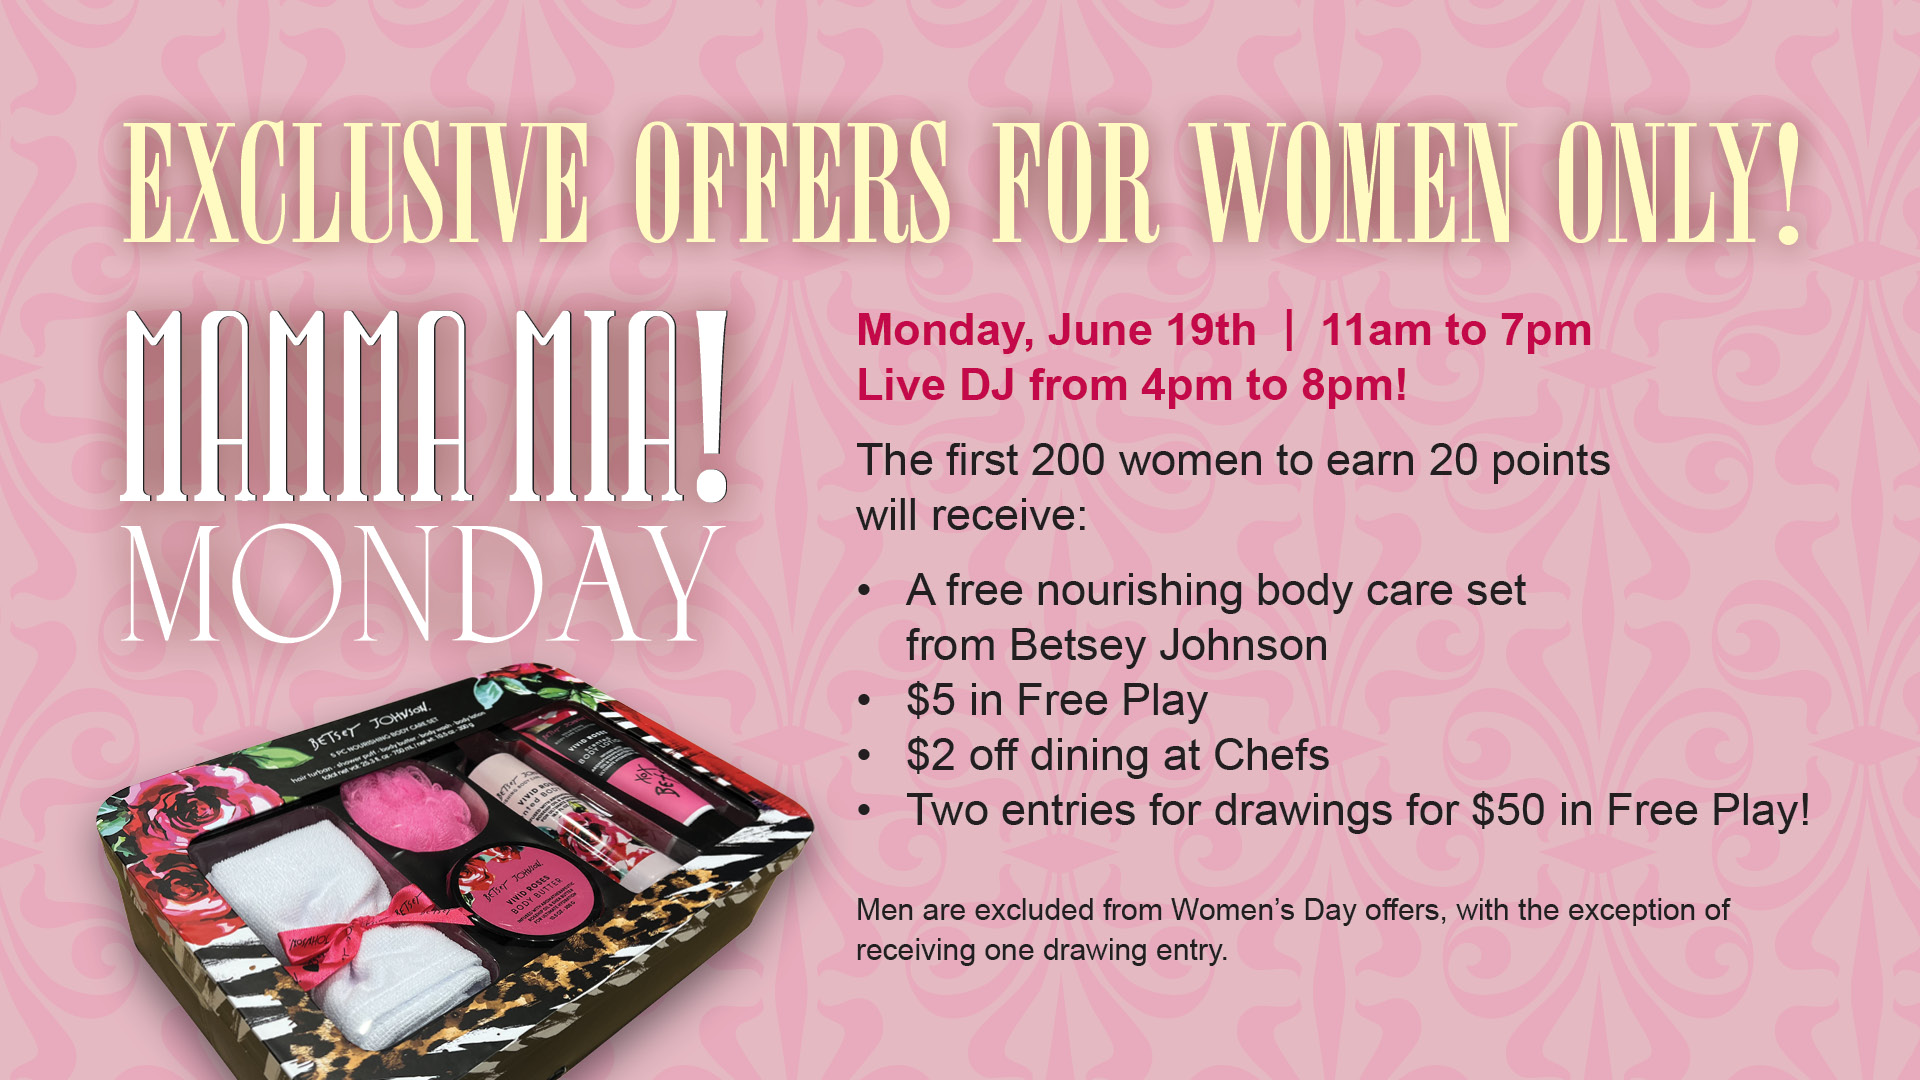 Mamma Mia! Monday - Exclusive offers for women only! Monday, June 19th. 11am to 7pm. Live DJ from 4pm to 8pm! The first 200 women to earn 20 points will receive: A free nourishing body care set from Betsey Johnson, $5 in free play, $2 off dining at Chefs, Two entries for drawings for $50 in free play! Men are excluded from Women's Day offers, with the exception of receiving one drawing entry.